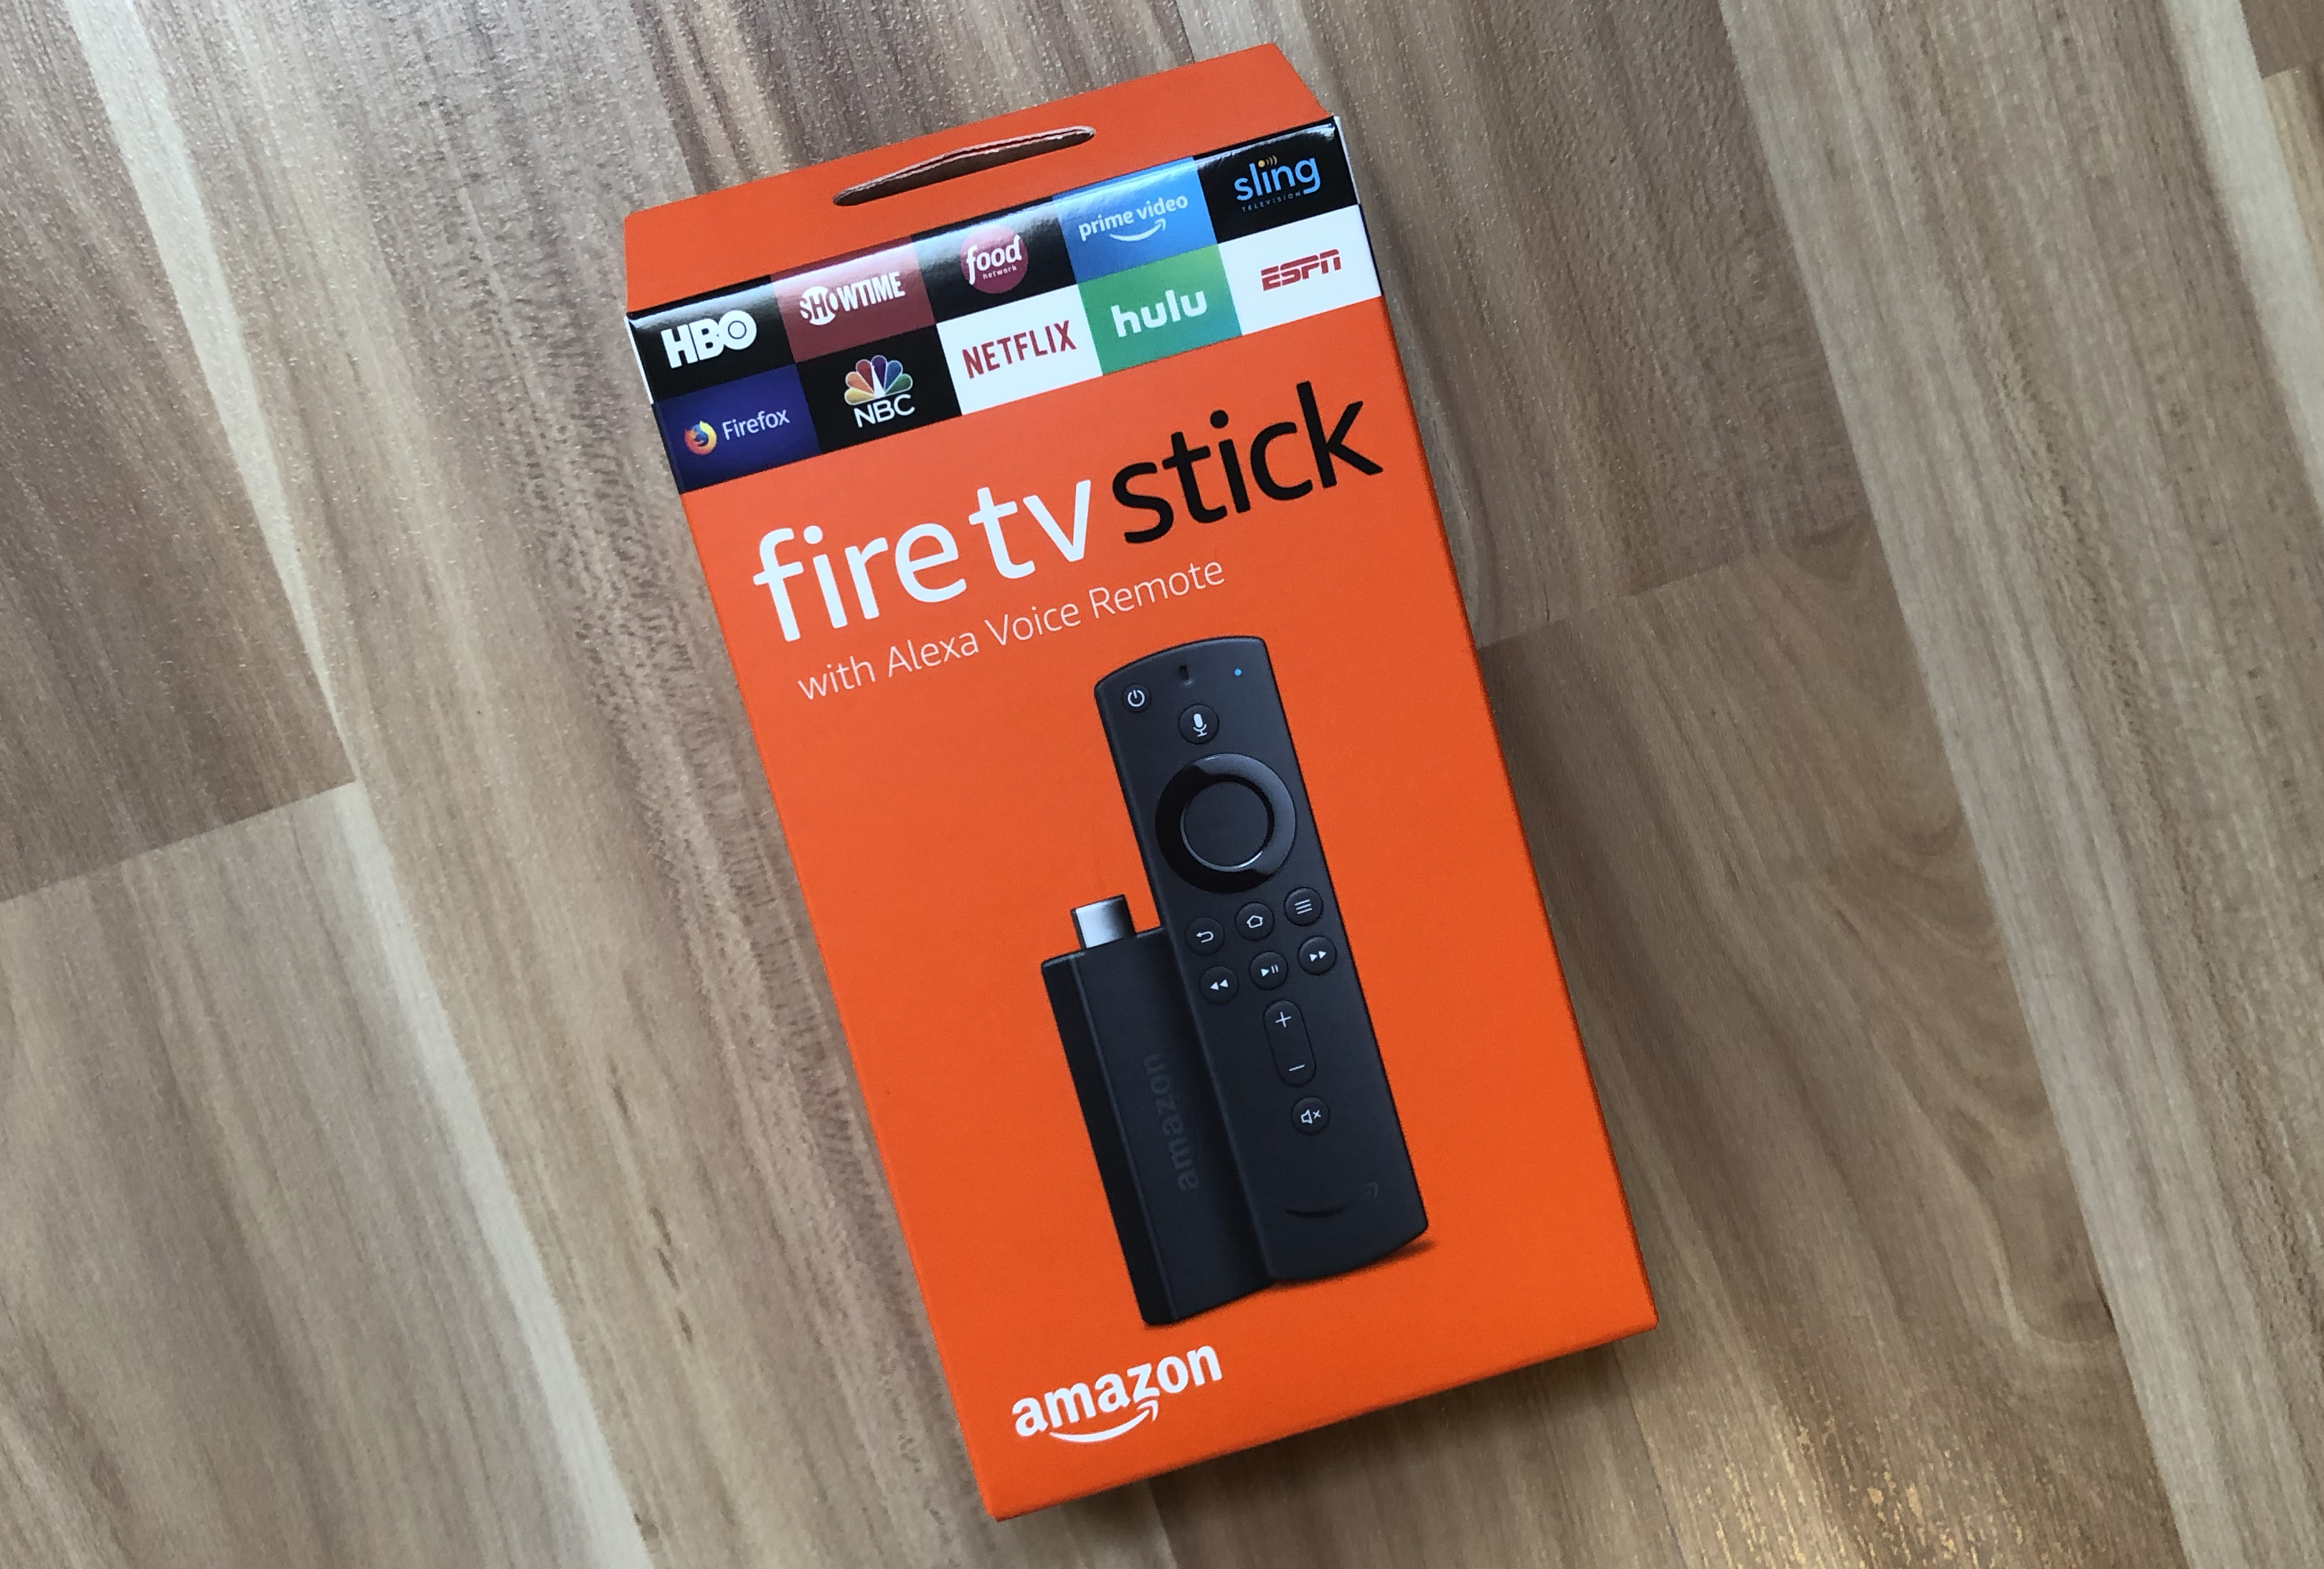 what do i get with amazon fire stick